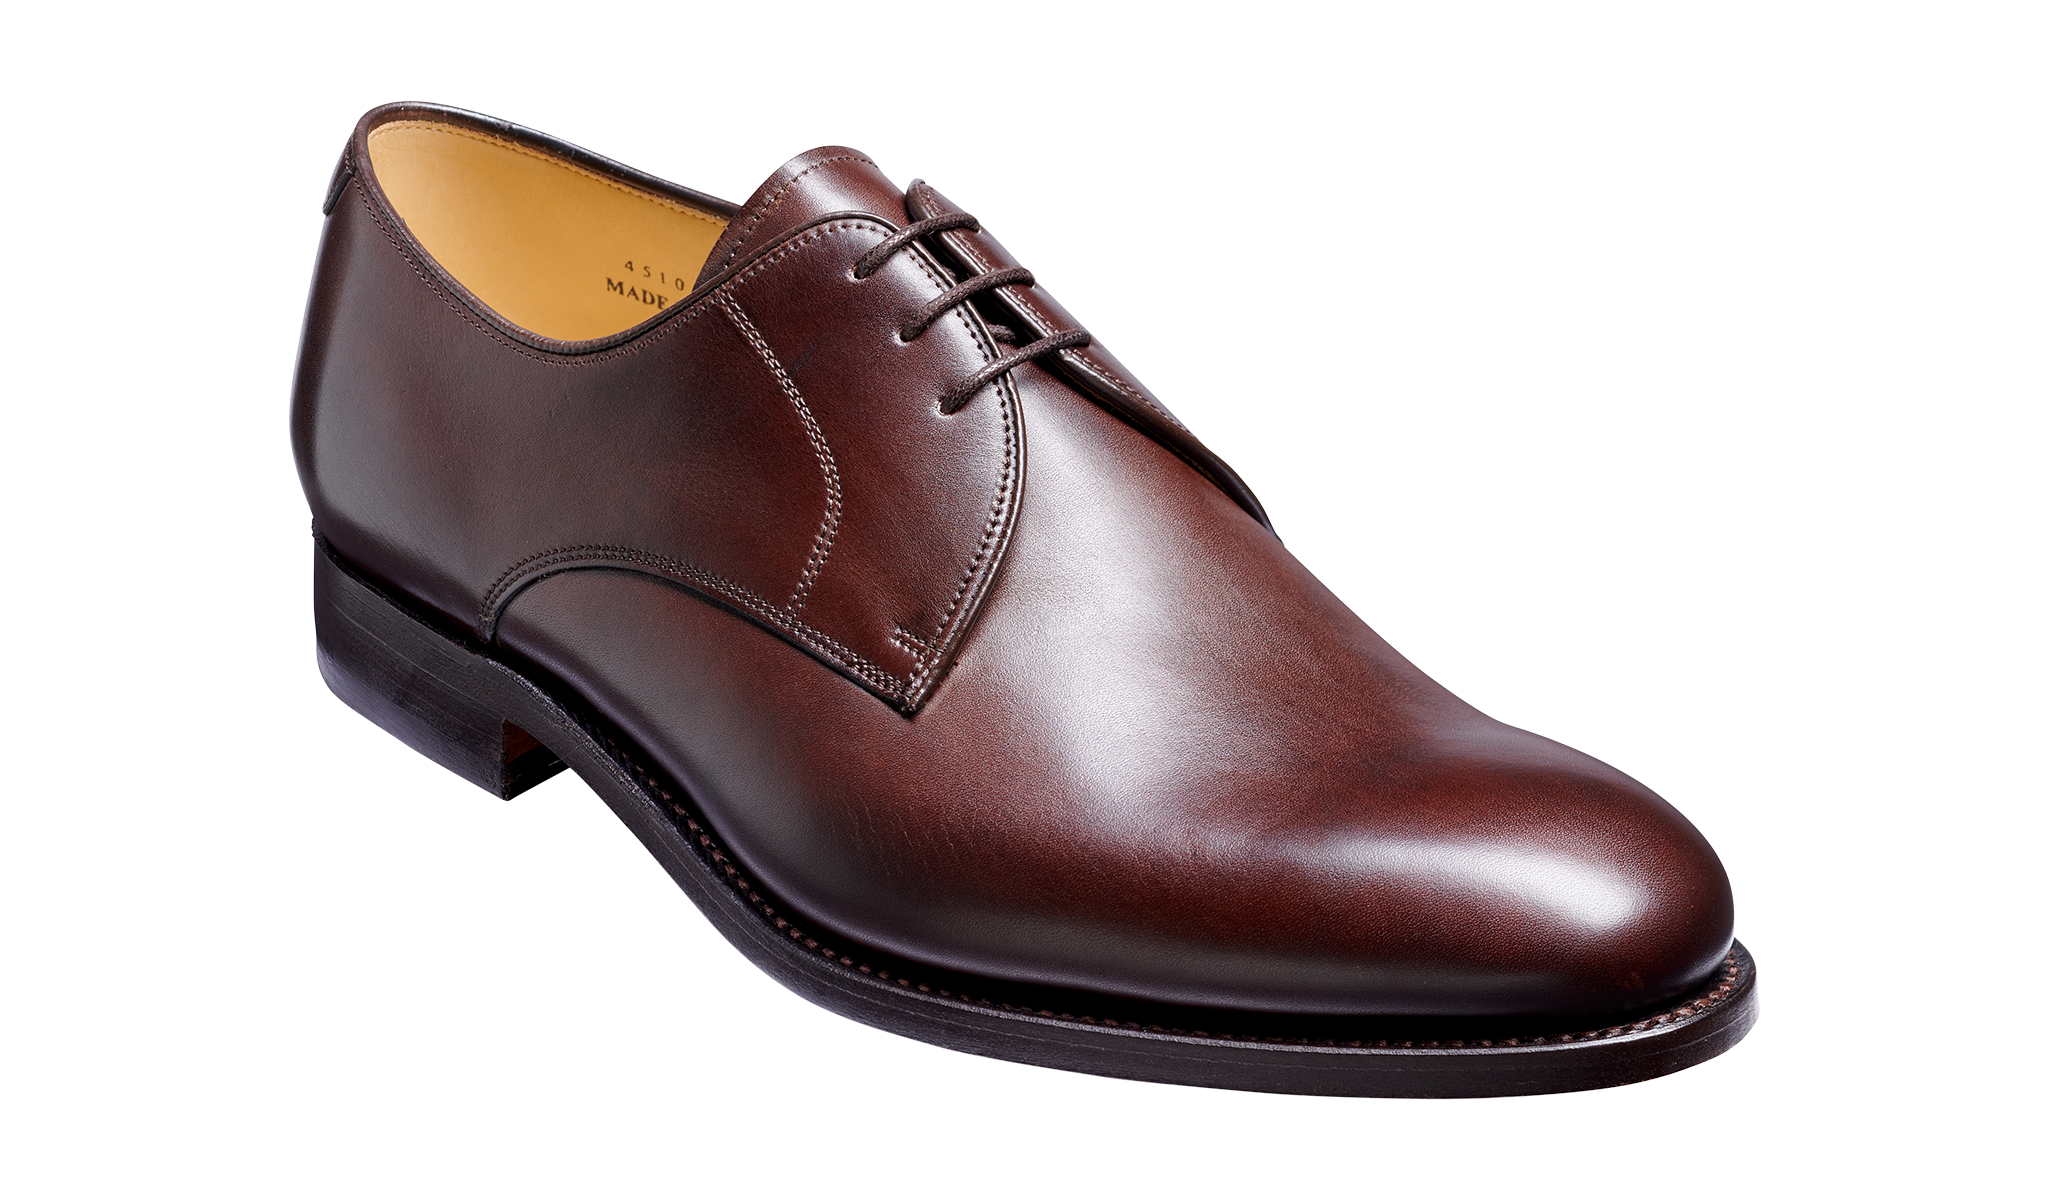 March - Men's Handmade Brown Leather Derby Shoe From Barker